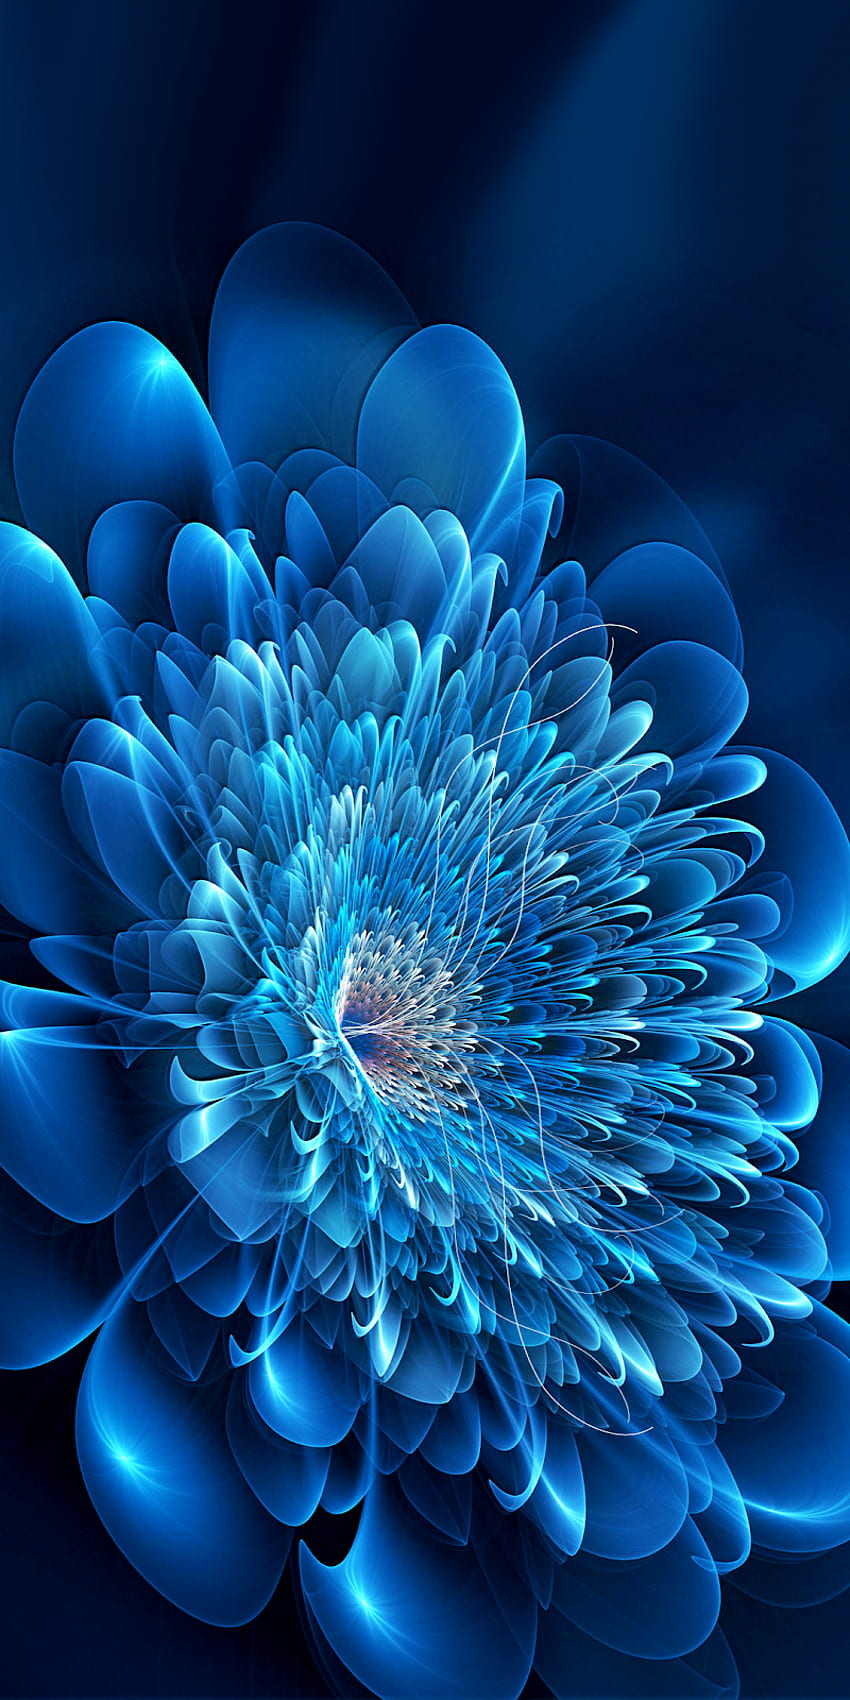 Digital Flower wallpaper iphone android background followme  Digital  flowers Flower phone wallpaper Flower background iphone